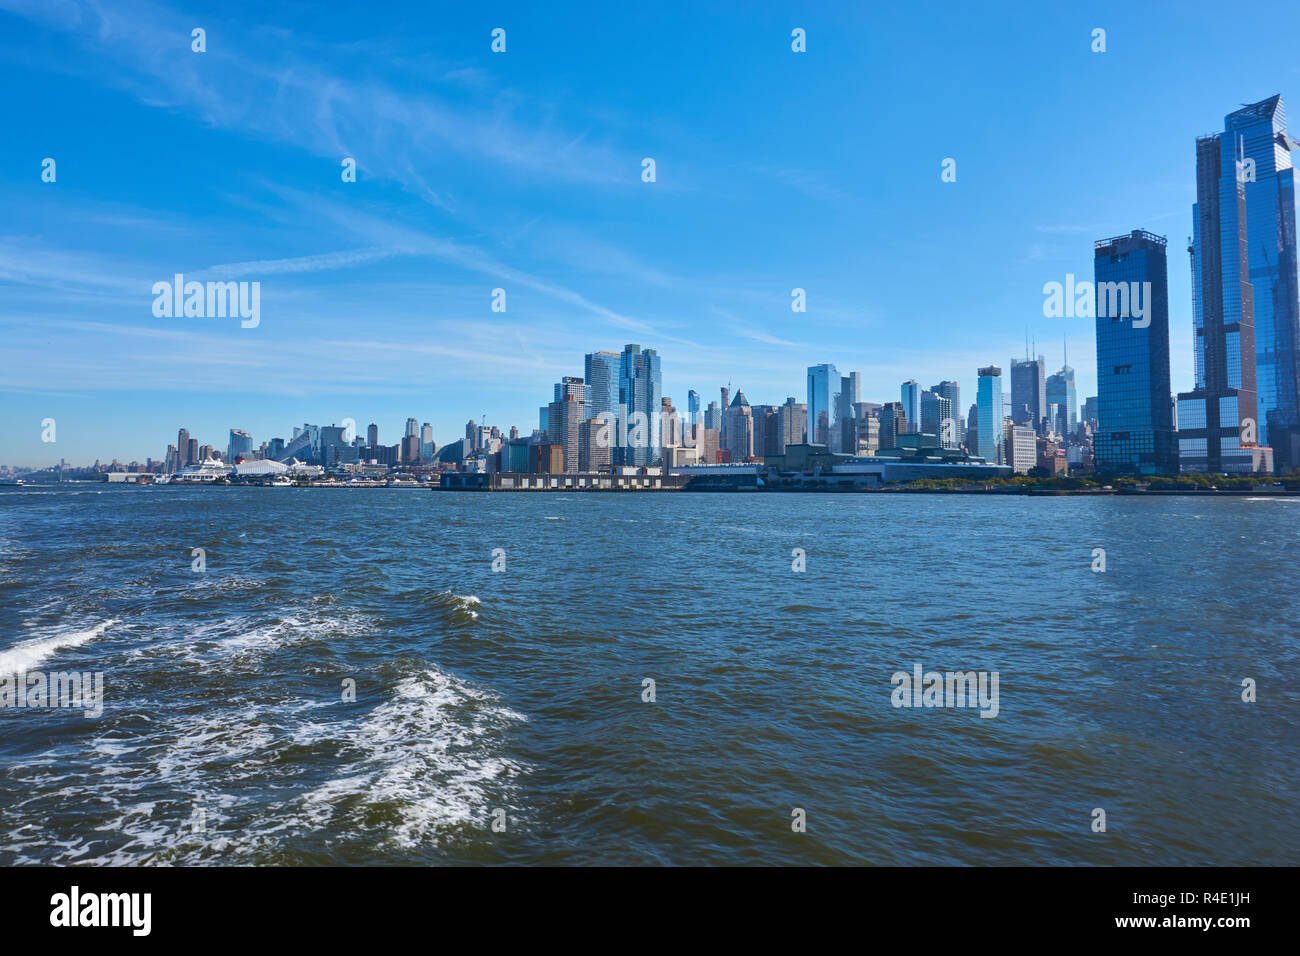 New York City skyline, a blue sky and water Stock Photo